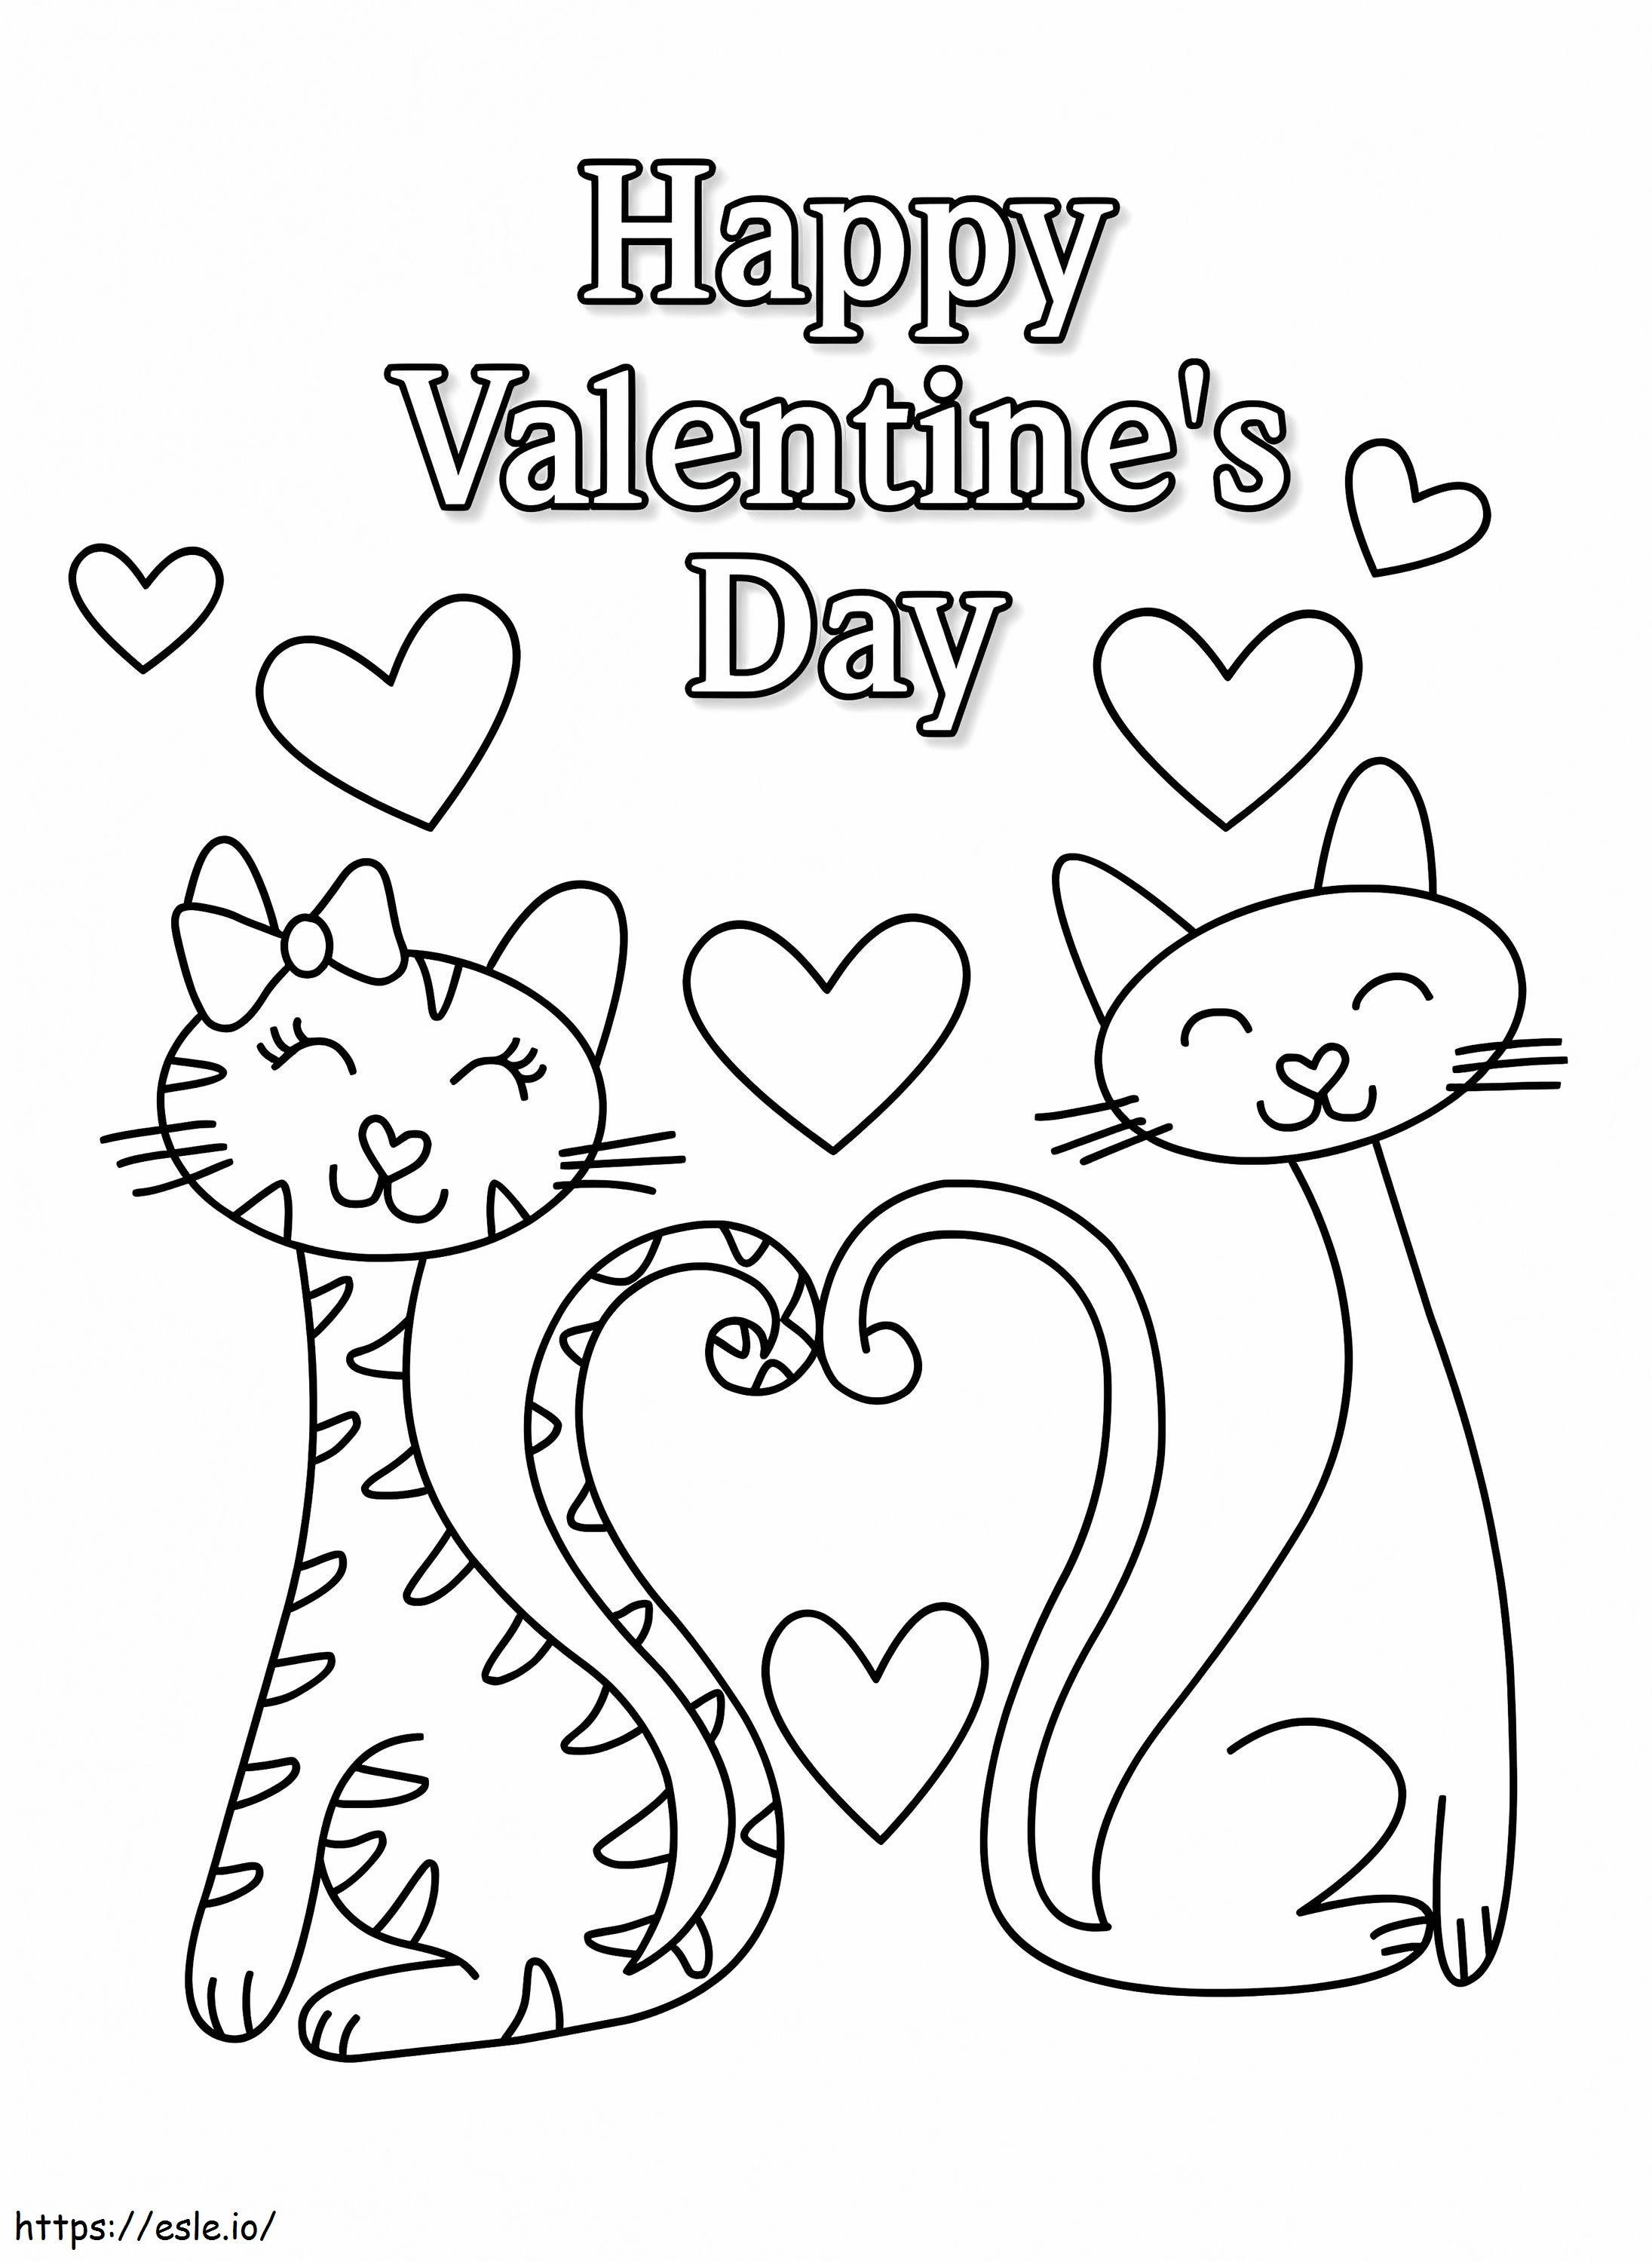 Happy Valentines Day Coloring Sheet Turtle Diary Page Pictures Of 1 748X1024 coloring page